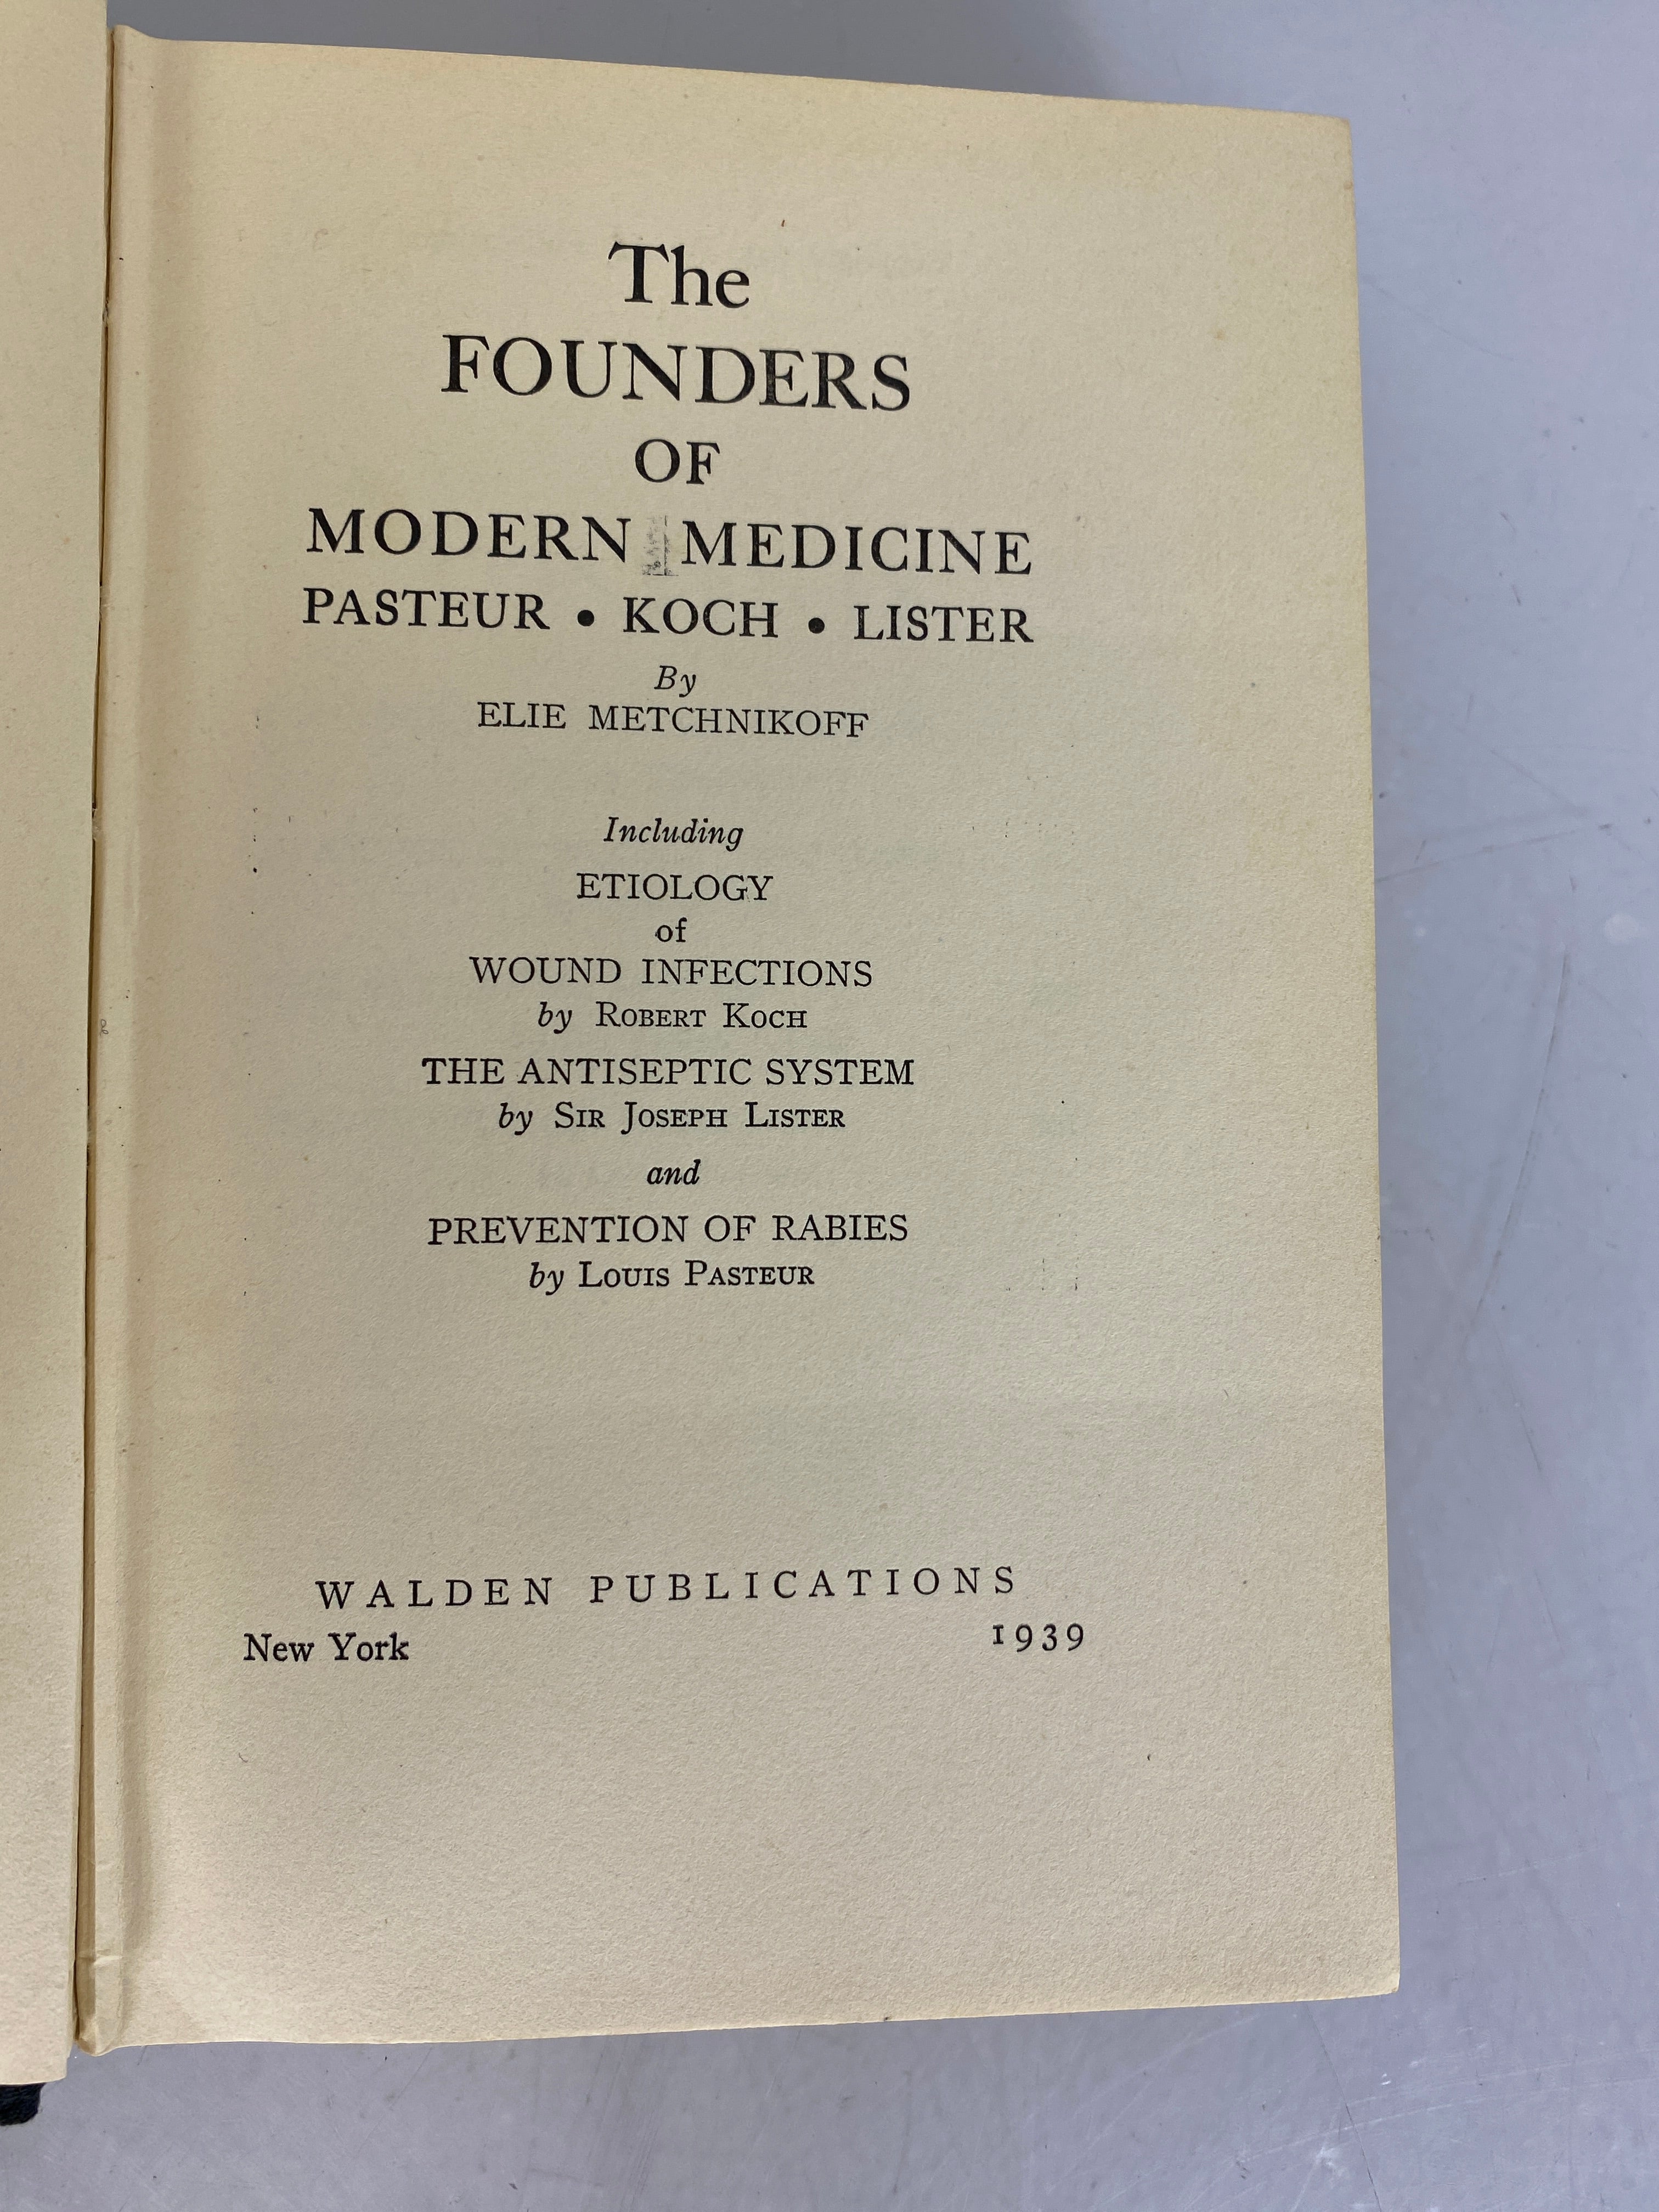 The Founders of Modern Medicine by Elie Metchnikoff 1939 HC Pasteur Koch Lister